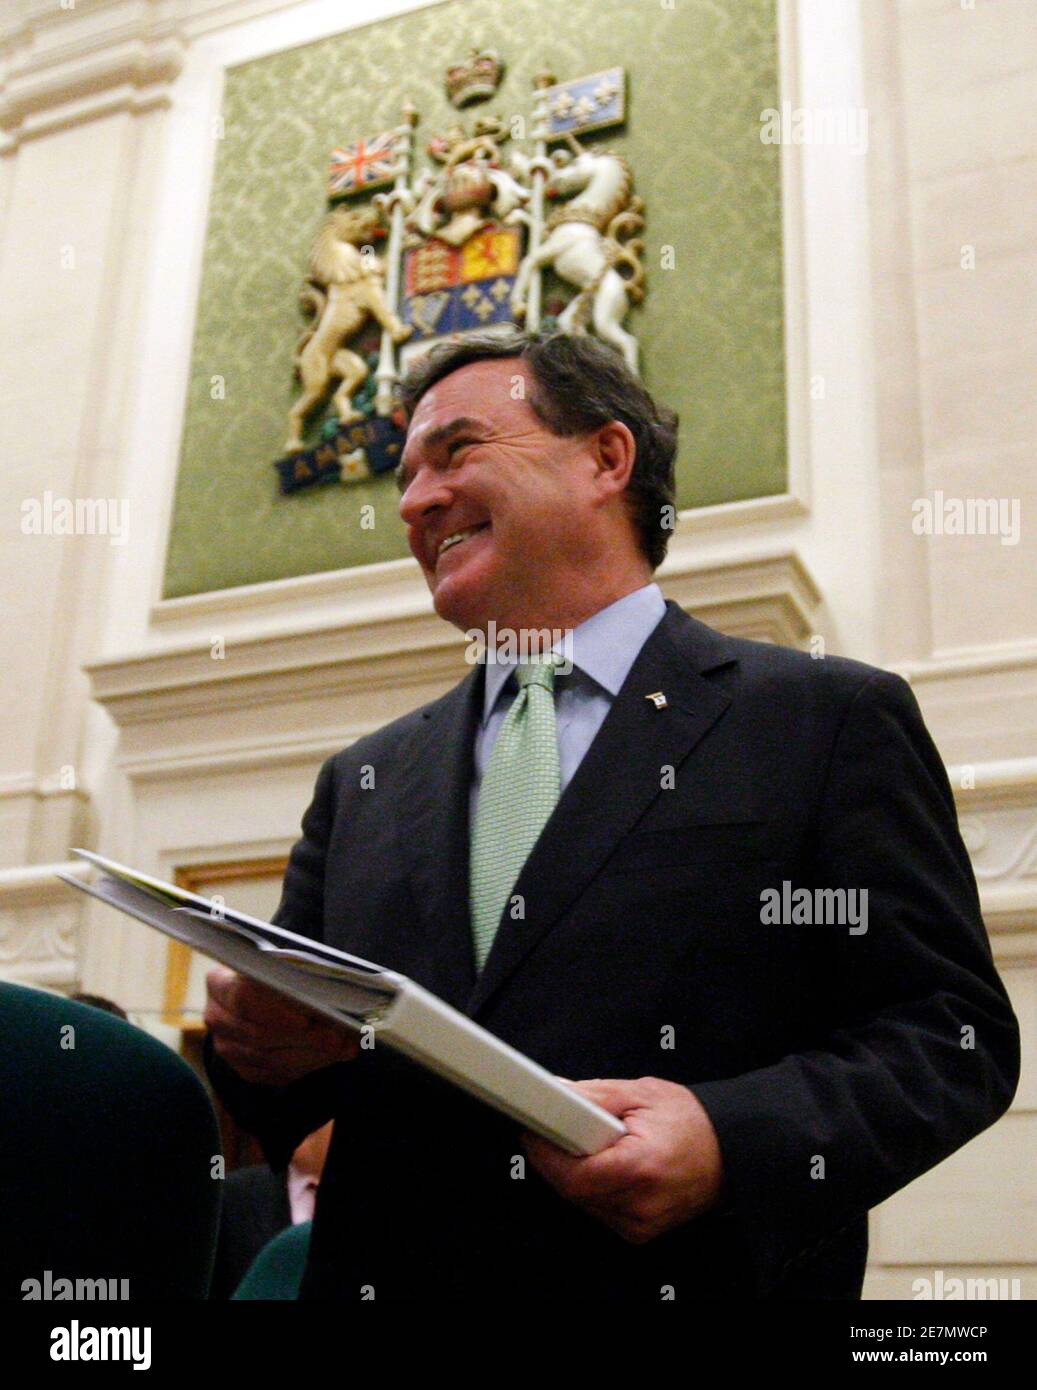 Canada's Finance Minister Jim Flaherty arrives to testify before the Commons finance committee on Parliament Hill in Ottawa October 27, 2009. Canada unveiled new rules on Tuesday for private pension plans that it said will boost protection for members and reduce funding volatility.       REUTERS/Chris Wattie       (CANADA POLITICS BUSINESS) Stock Photo